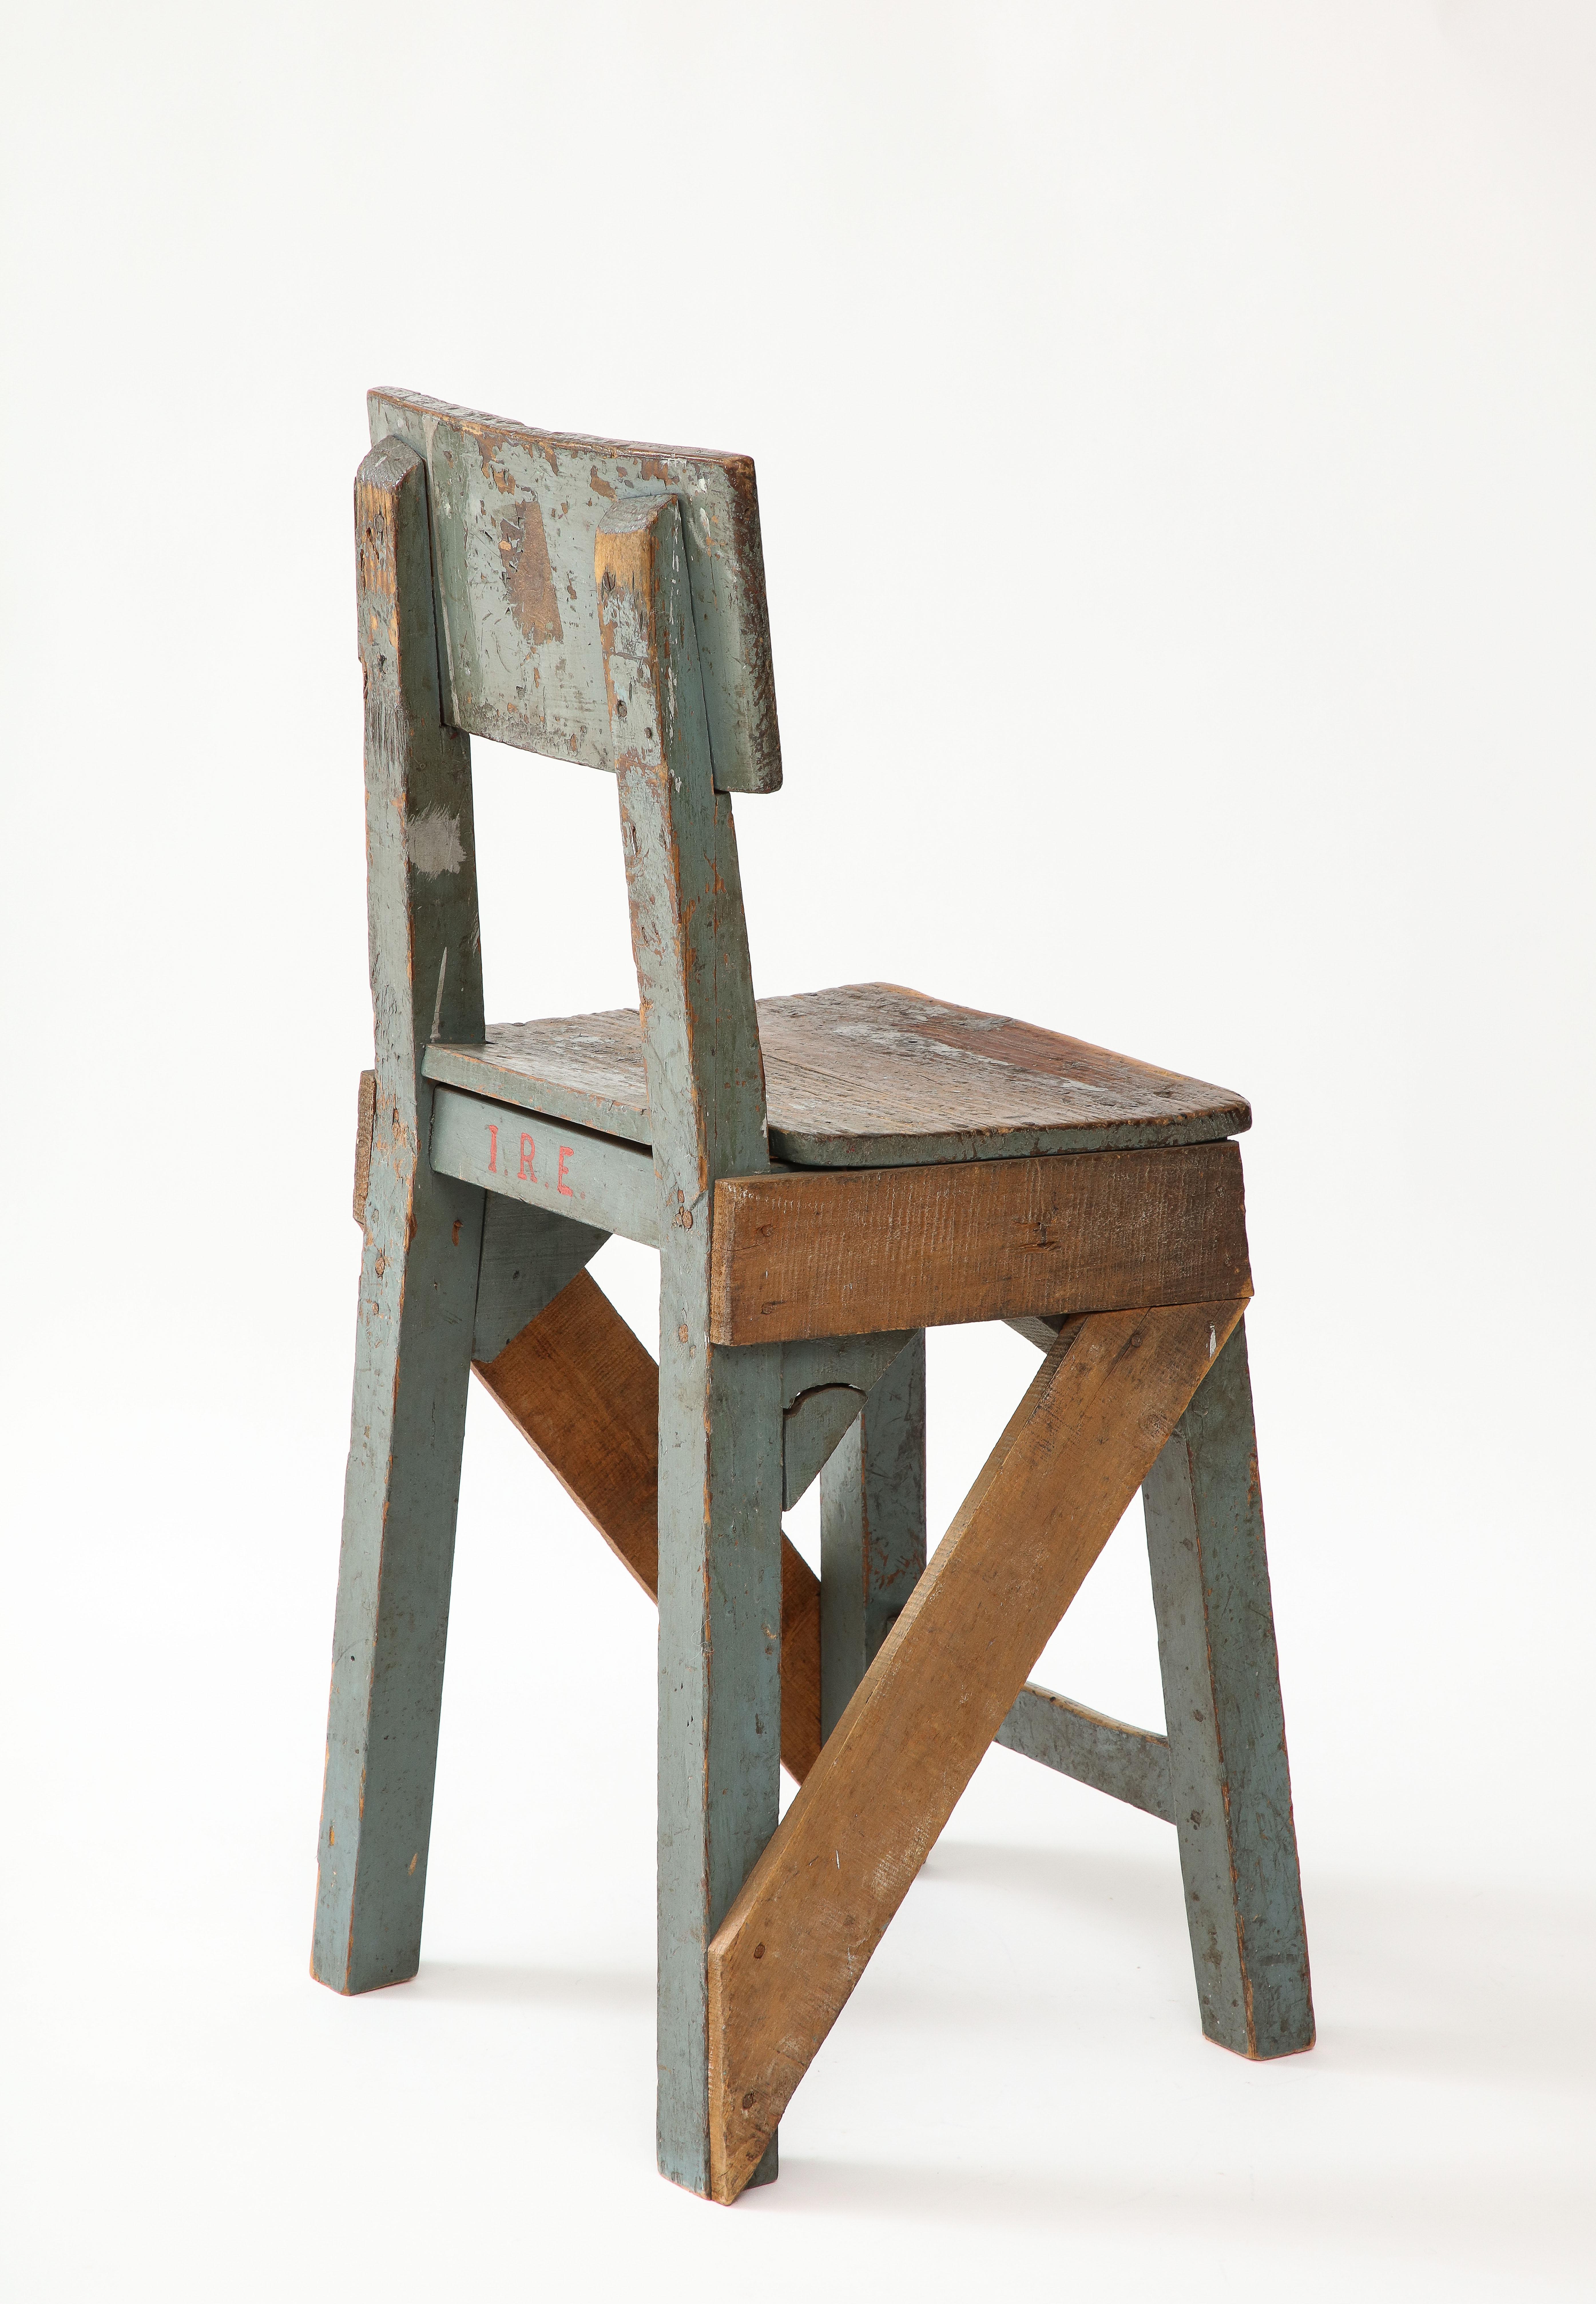 French Primitive Artist’s Chair, c. 1950 For Sale 4